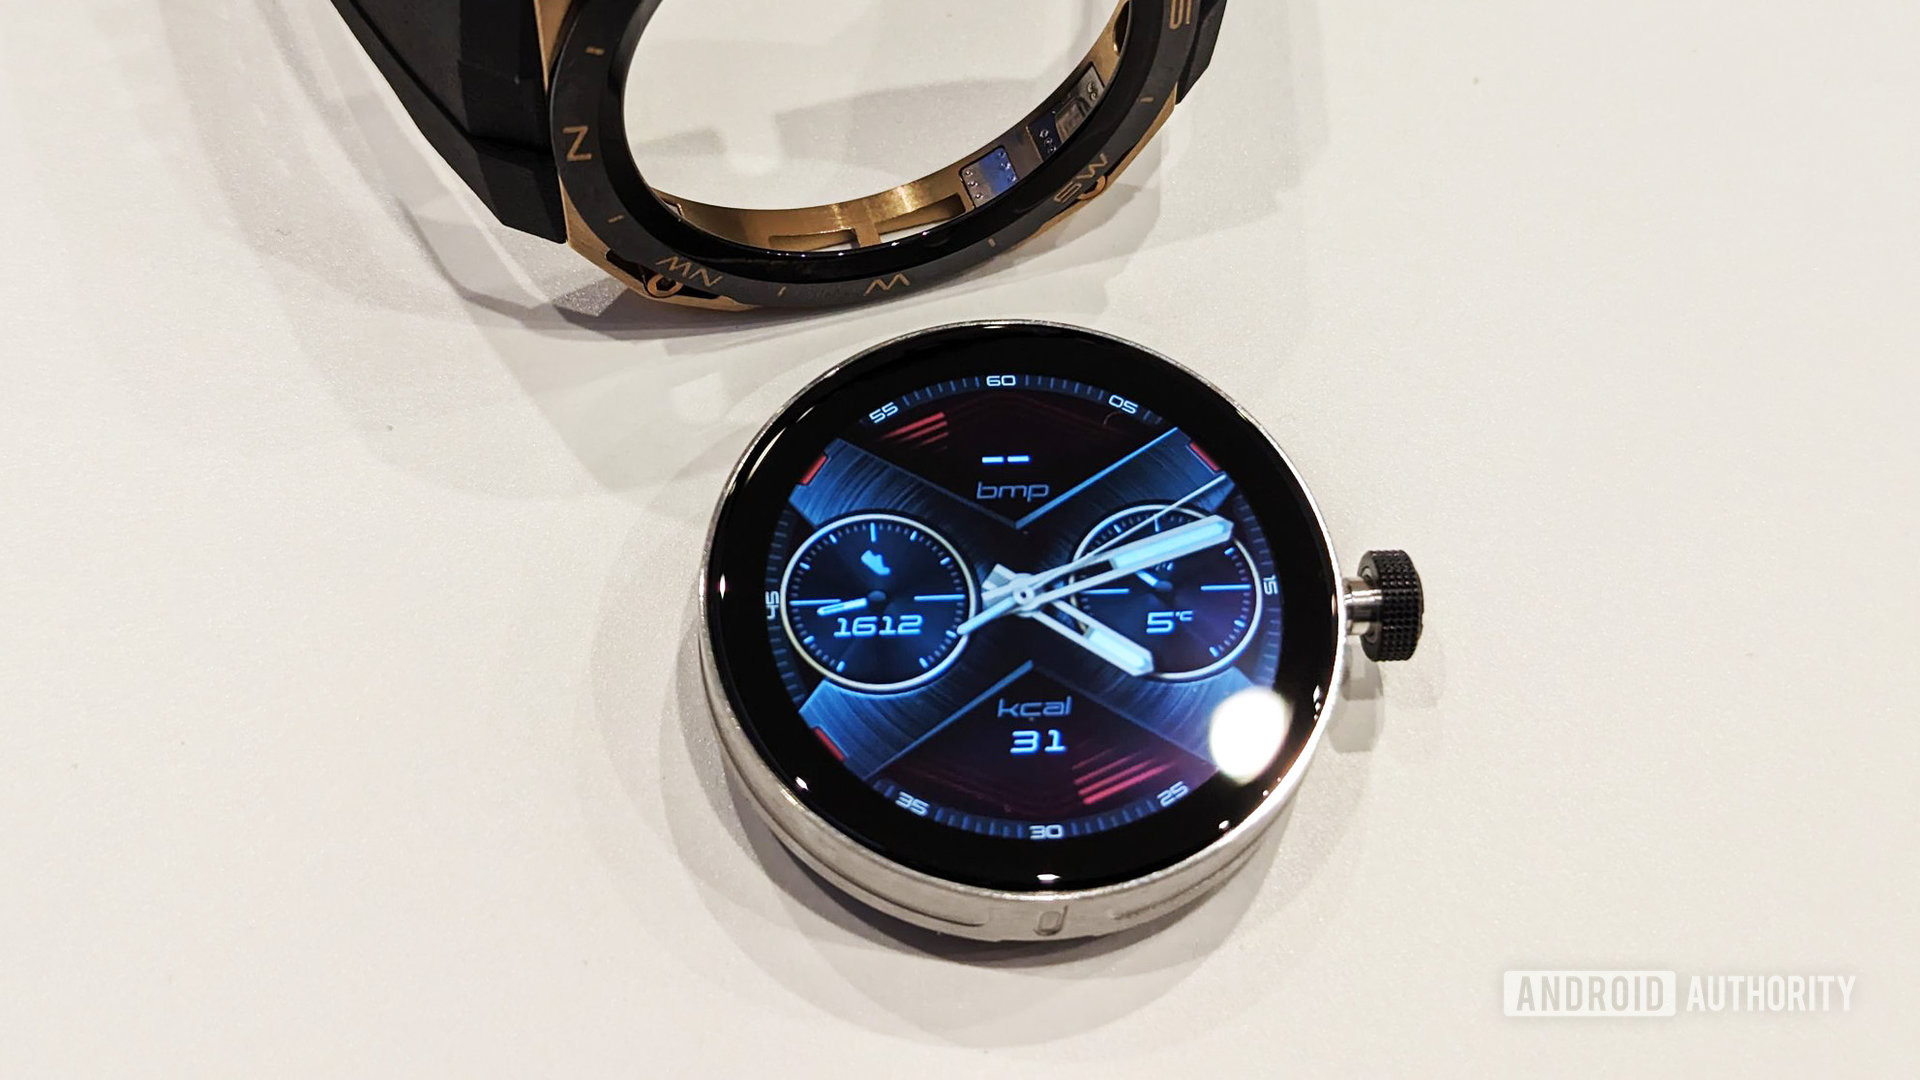 alias Explosivos Valiente HUAWEI's new watch looks like a G-Shock and Pop Swatch mashup